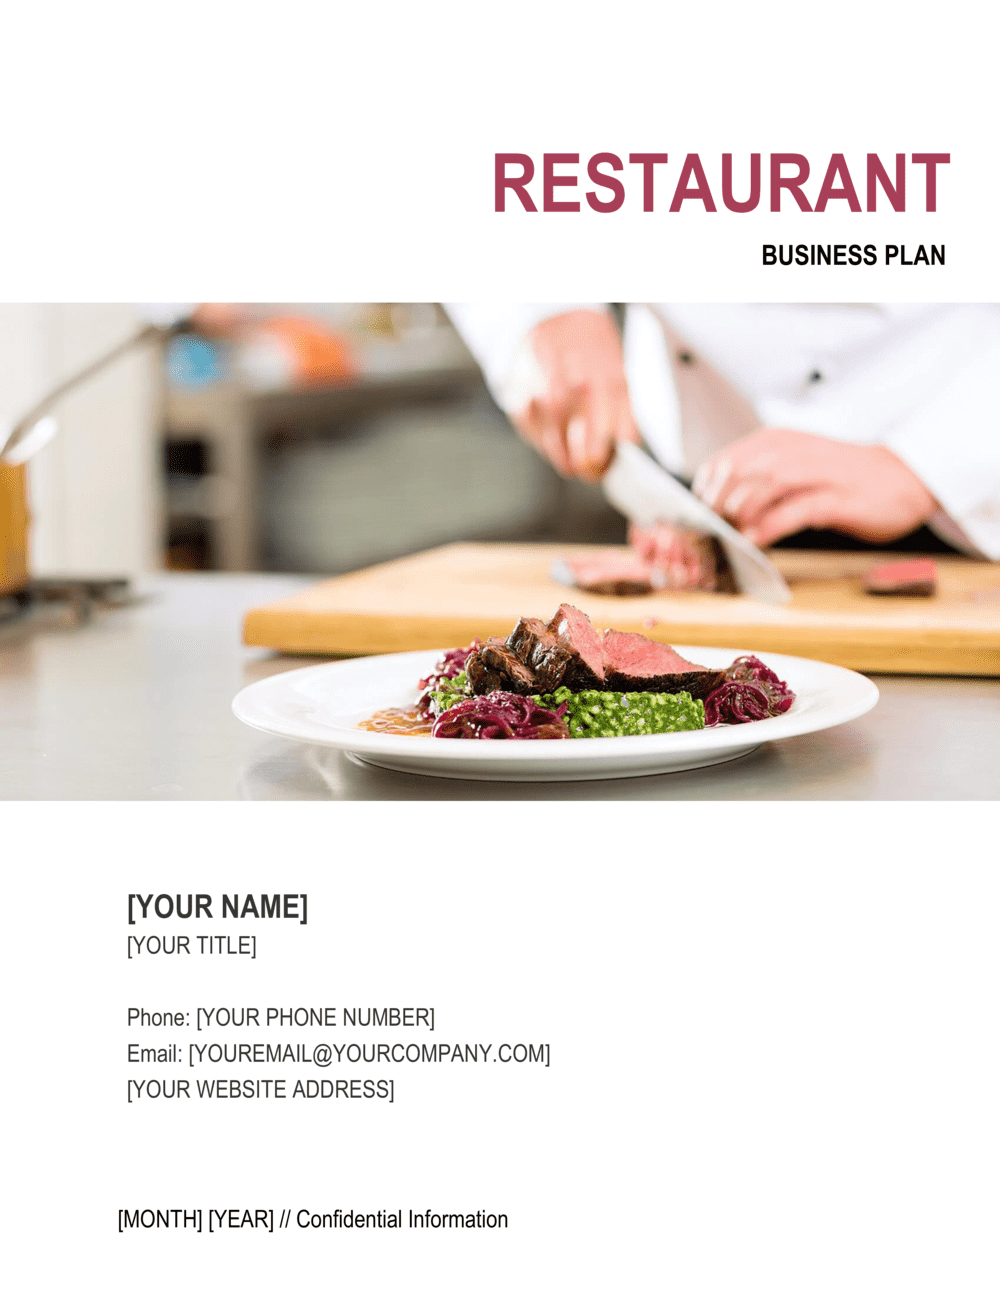 example business plan for a restaurant